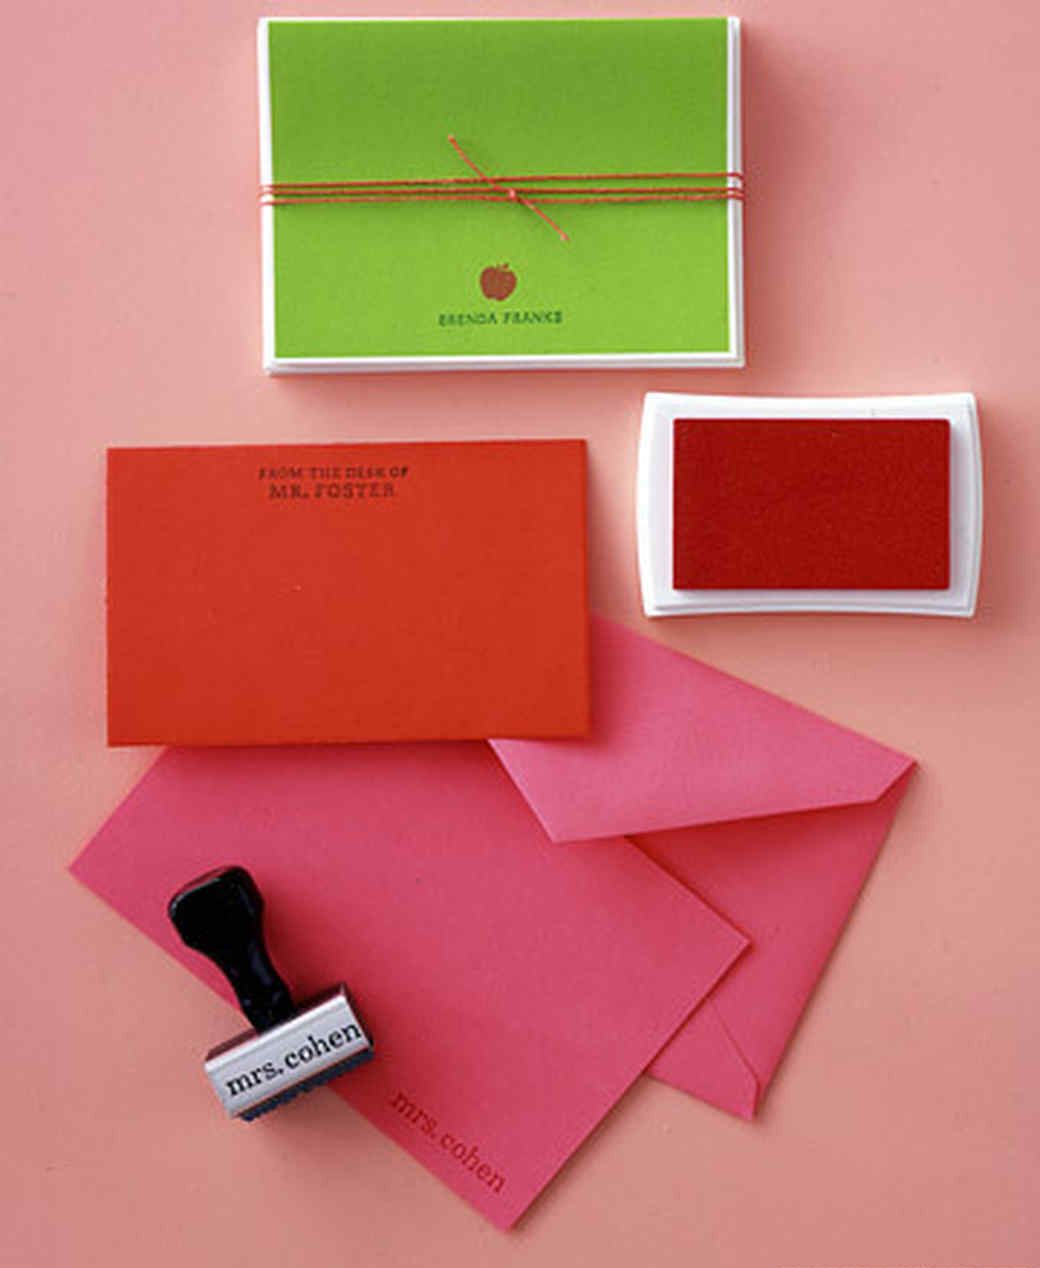 <p>Give the teacher your own stamp of approval with personalized stamps, ink pads, and blank note cards in warm, vivid colors. Print out the wording and have an office supply store create a name stamp. Bring along a photocopy of the apple icon to make a second stamp and give the pair.&nbsp;</p><p>Shop Now: Best Paper Greetings Blank Greeting Cards, $11, amazon.com. </p>